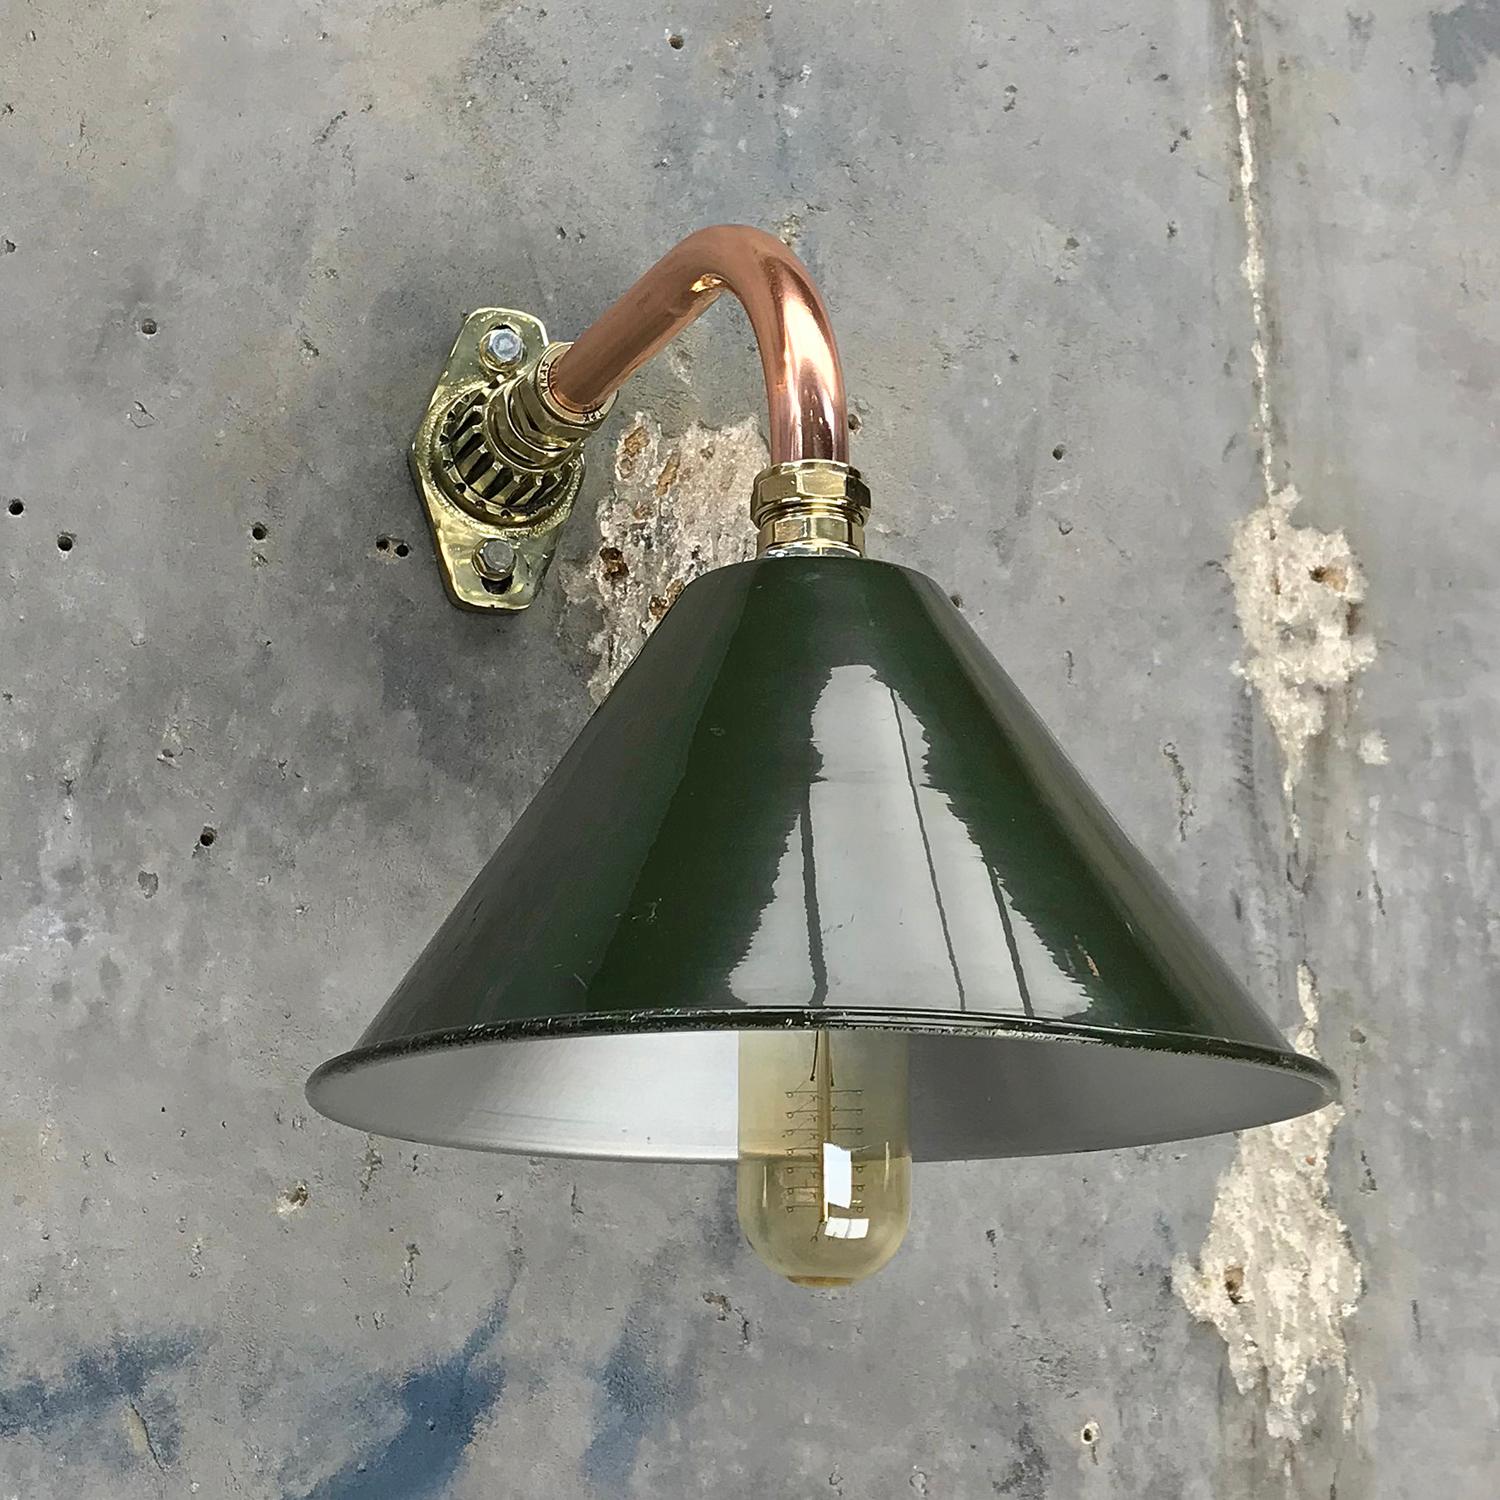 1980s Ex British Army Light Shade / Copper and Brass Cantilever, Original Green For Sale 5